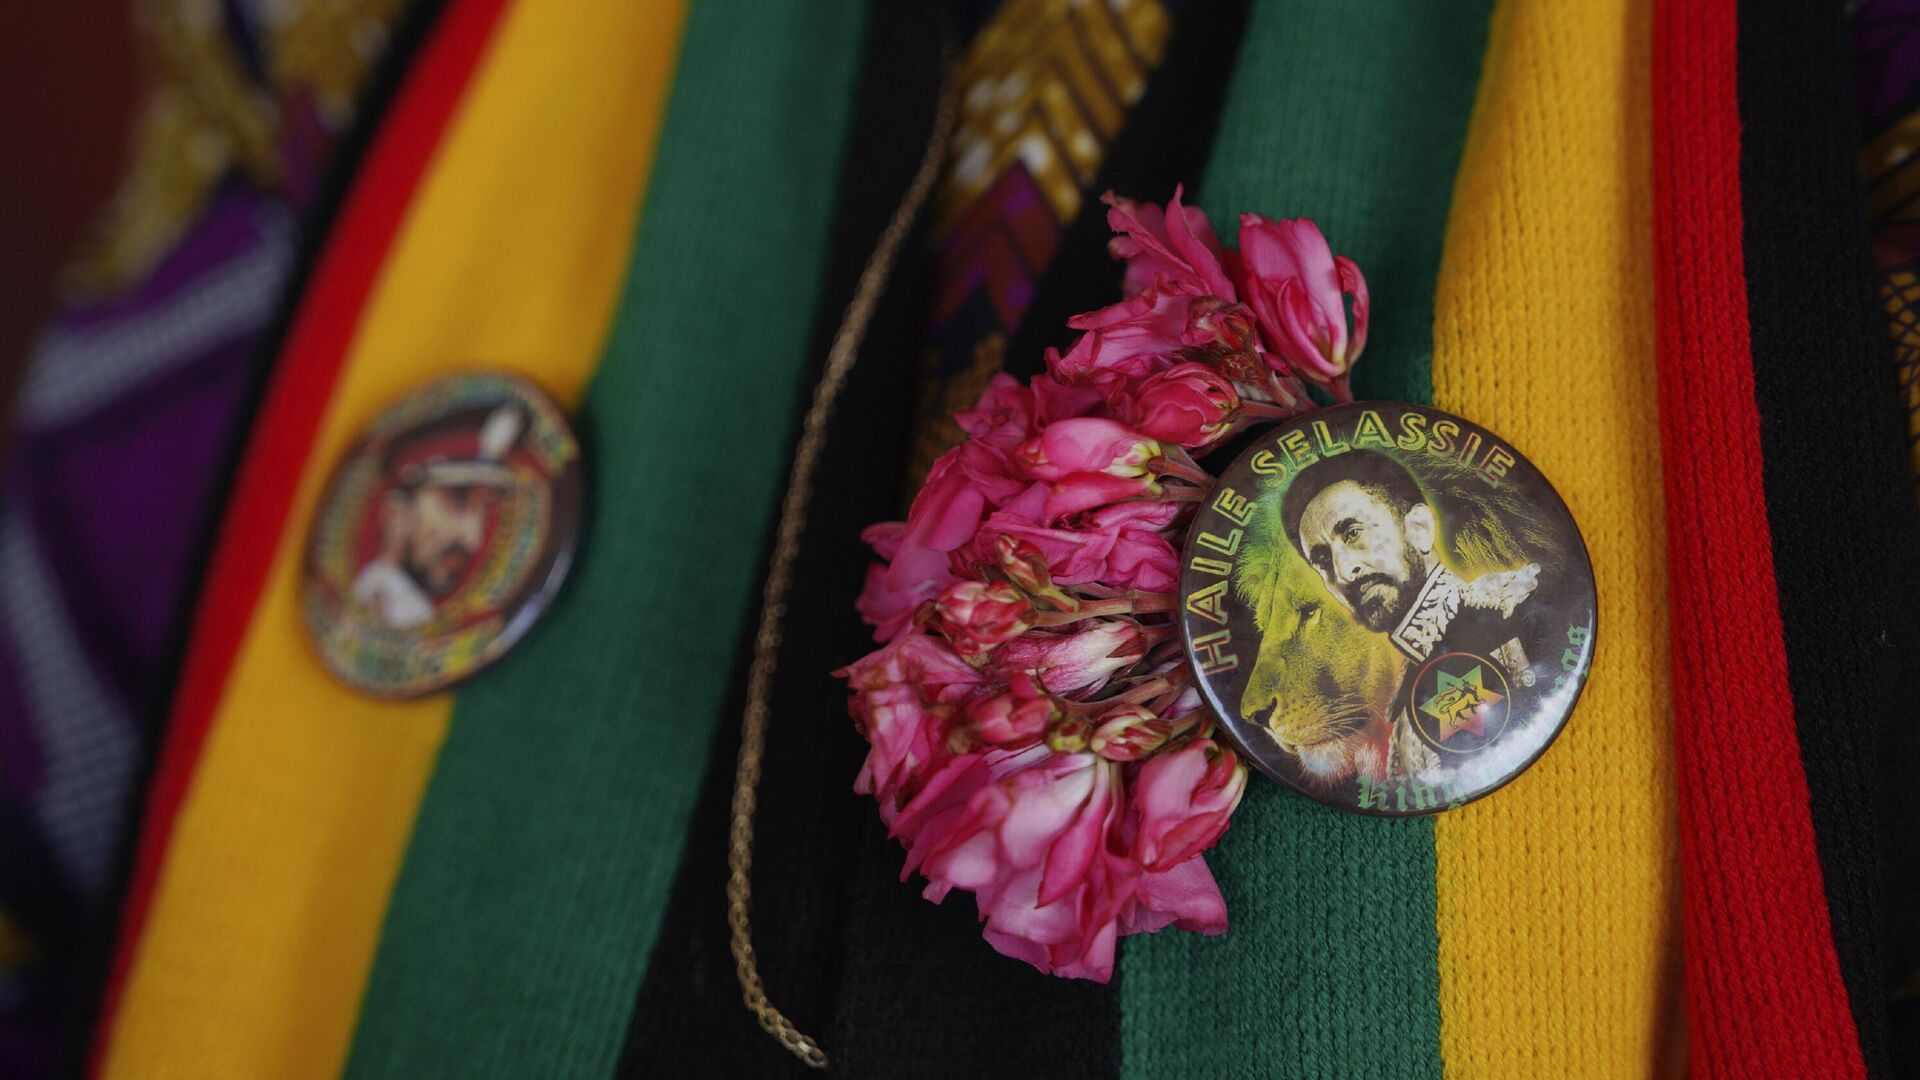 A Rastafari member wears two buttons depicting Haile Selassie I, the late Ethiopian emperor, while waiting for service to start at the Ras Freeman Foundation for the Unification of Rastafari tabernacle on Sunday, May 14, 2023, in Liberta, Antigua. - Sputnik Africa, 1920, 02.11.2023